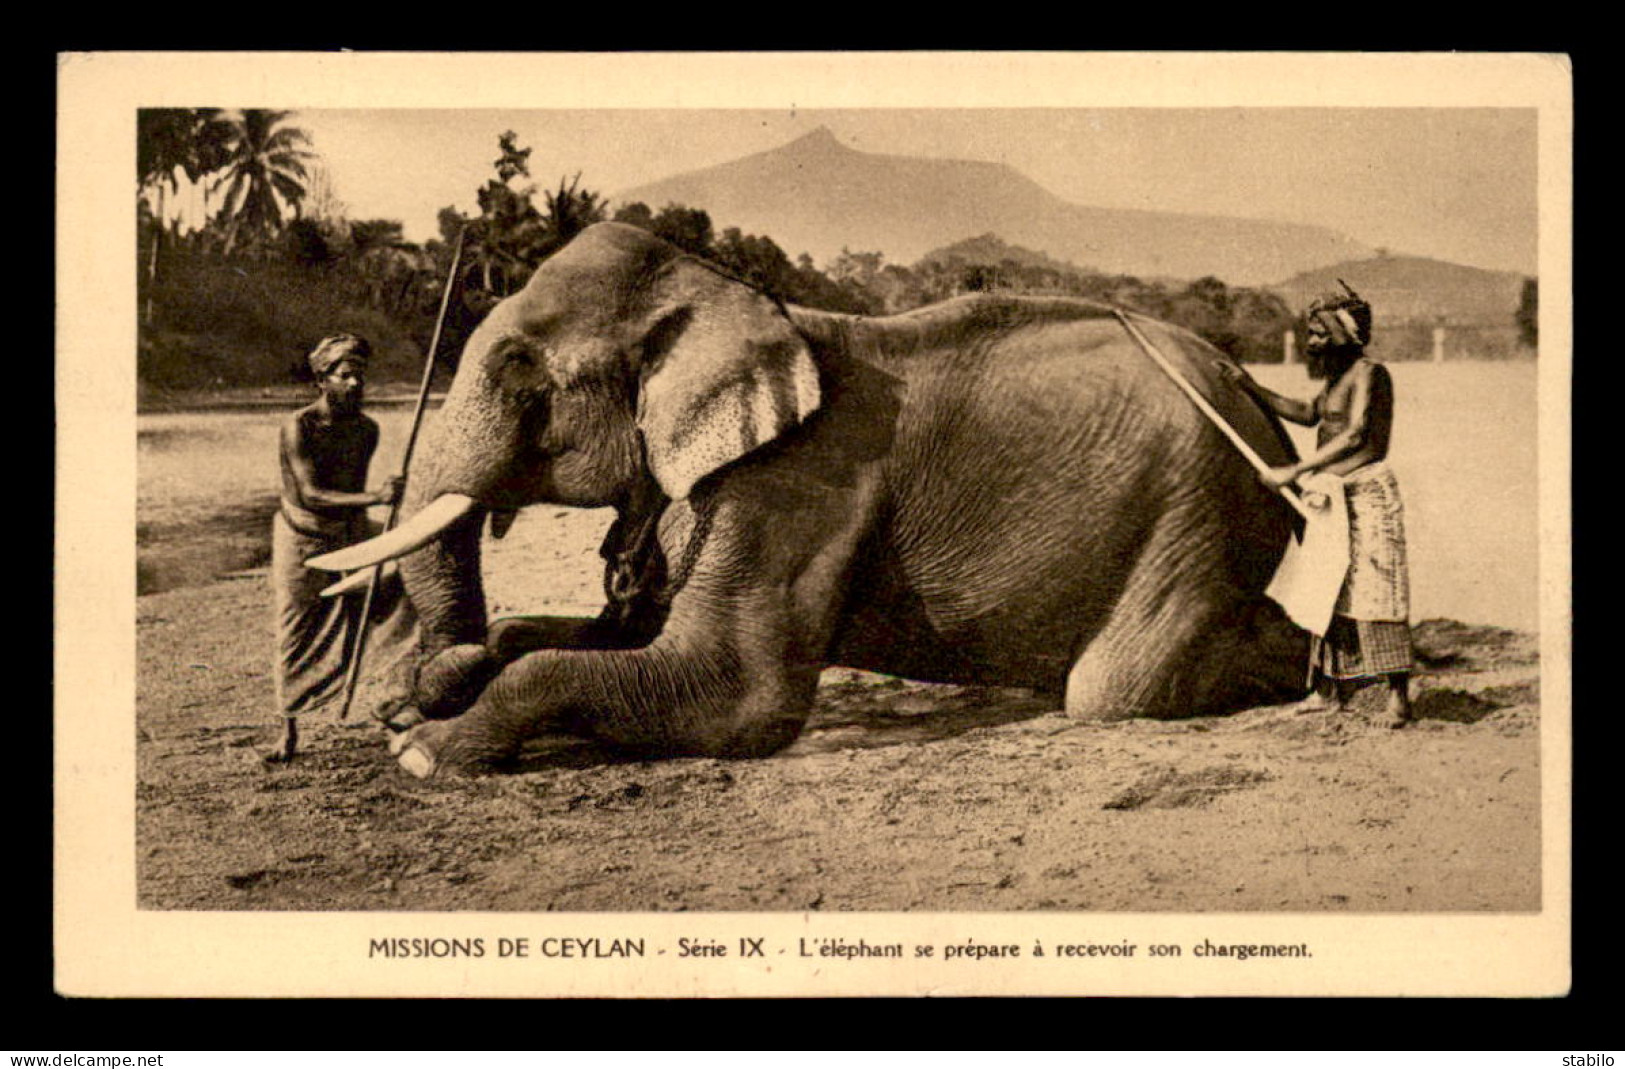 MISSIONS - CEYLAN - OBLATS DE MARIE IMMACULEE - ELEPHANT RECEVANT SON CHARGEMENT - Missions